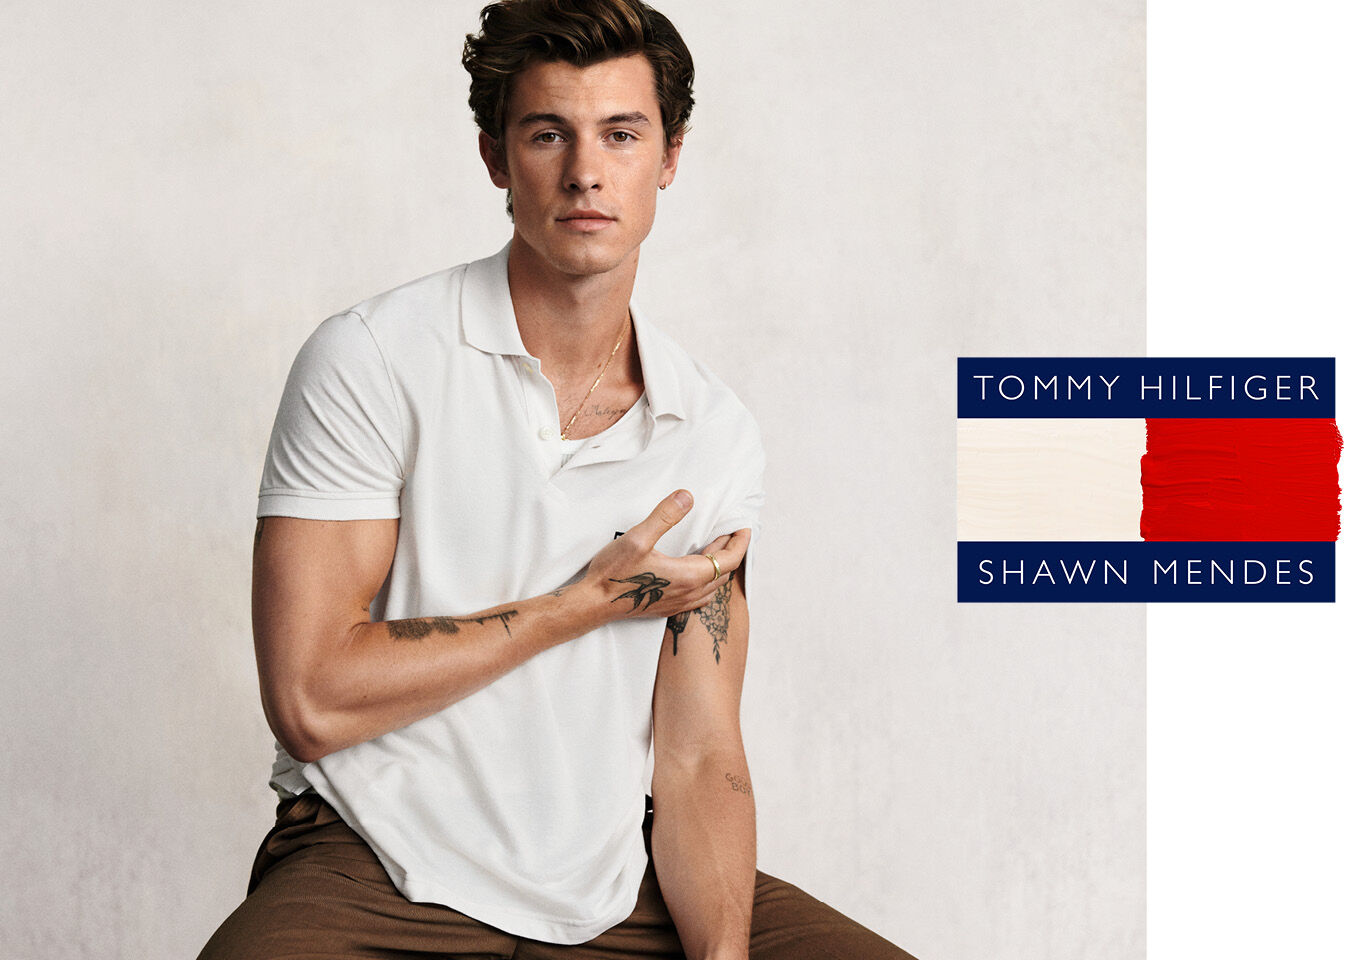 Tommy Hilfiger - A PARTNERSHIP WITH PURPOSE